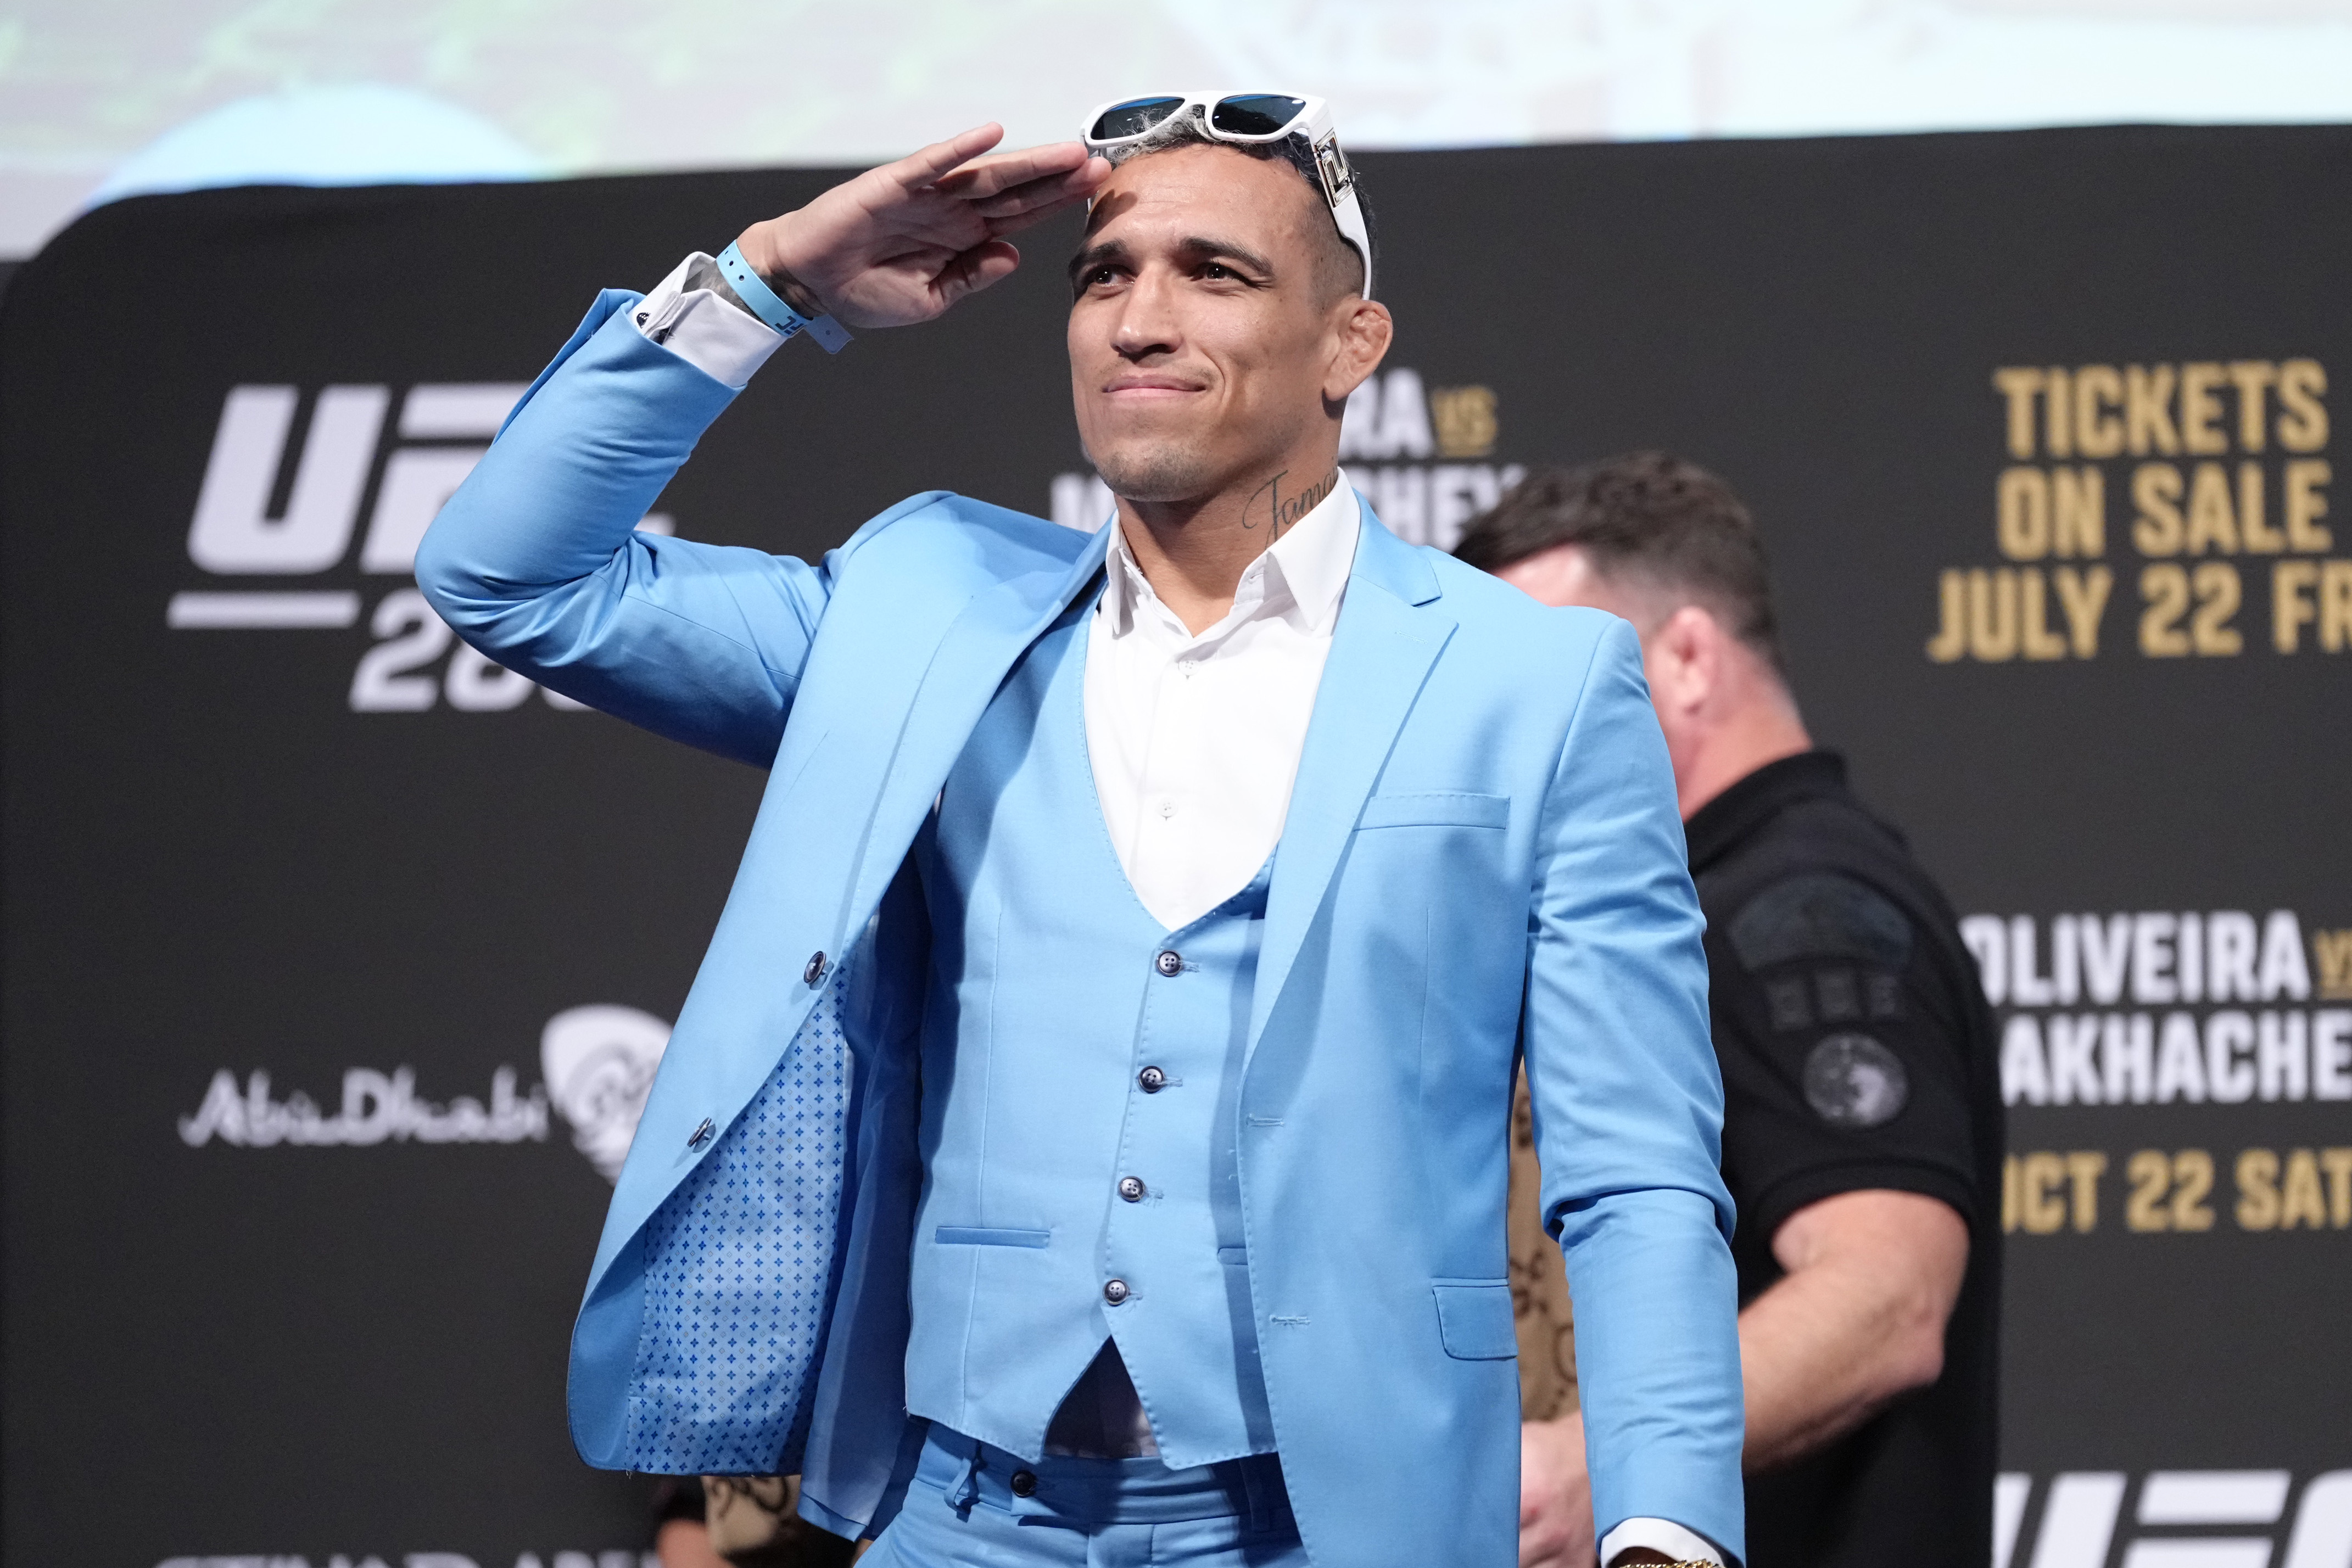 Charles Oliveira is set to face Islam Makhachev at UFC 280 in October.